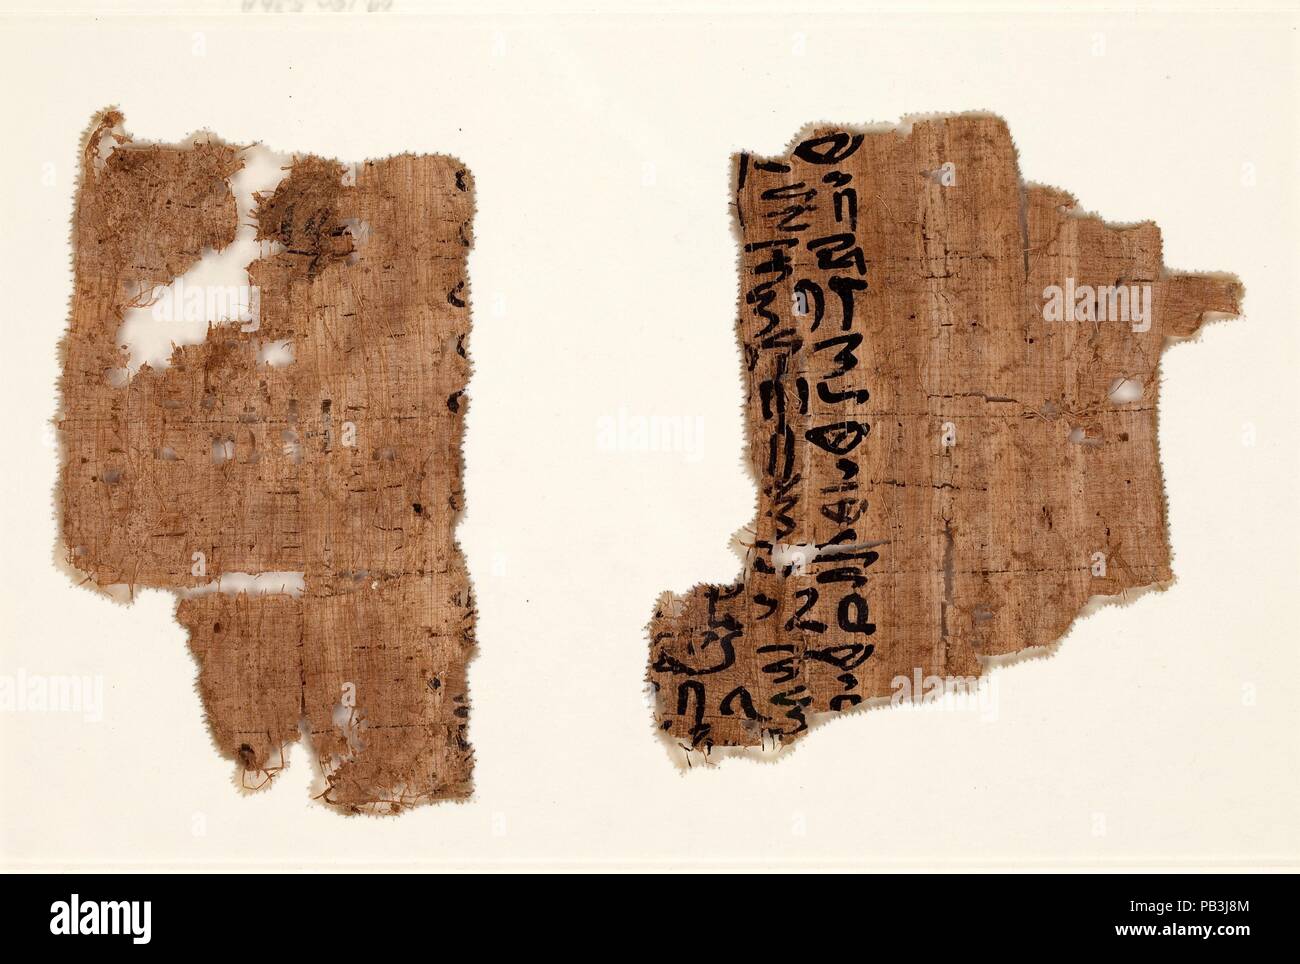 Three frames with papyrus fragments. Dimensions: Framed (a): H. 13 cm (5 1/8 in.); W. 19.1 cm (7 1/2 in.)  Framed (b): H. 13 cm (5 1/8 in.); W. 29.2 cm (11 1/2 in.)  Framed (c): H. 13 cm (5 1/8 in.) squared. Dynasty: Dynasty 12-13. Date: ca. 1981-1640 B.C.. Museum: Metropolitan Museum of Art, New York, USA. Stock Photo